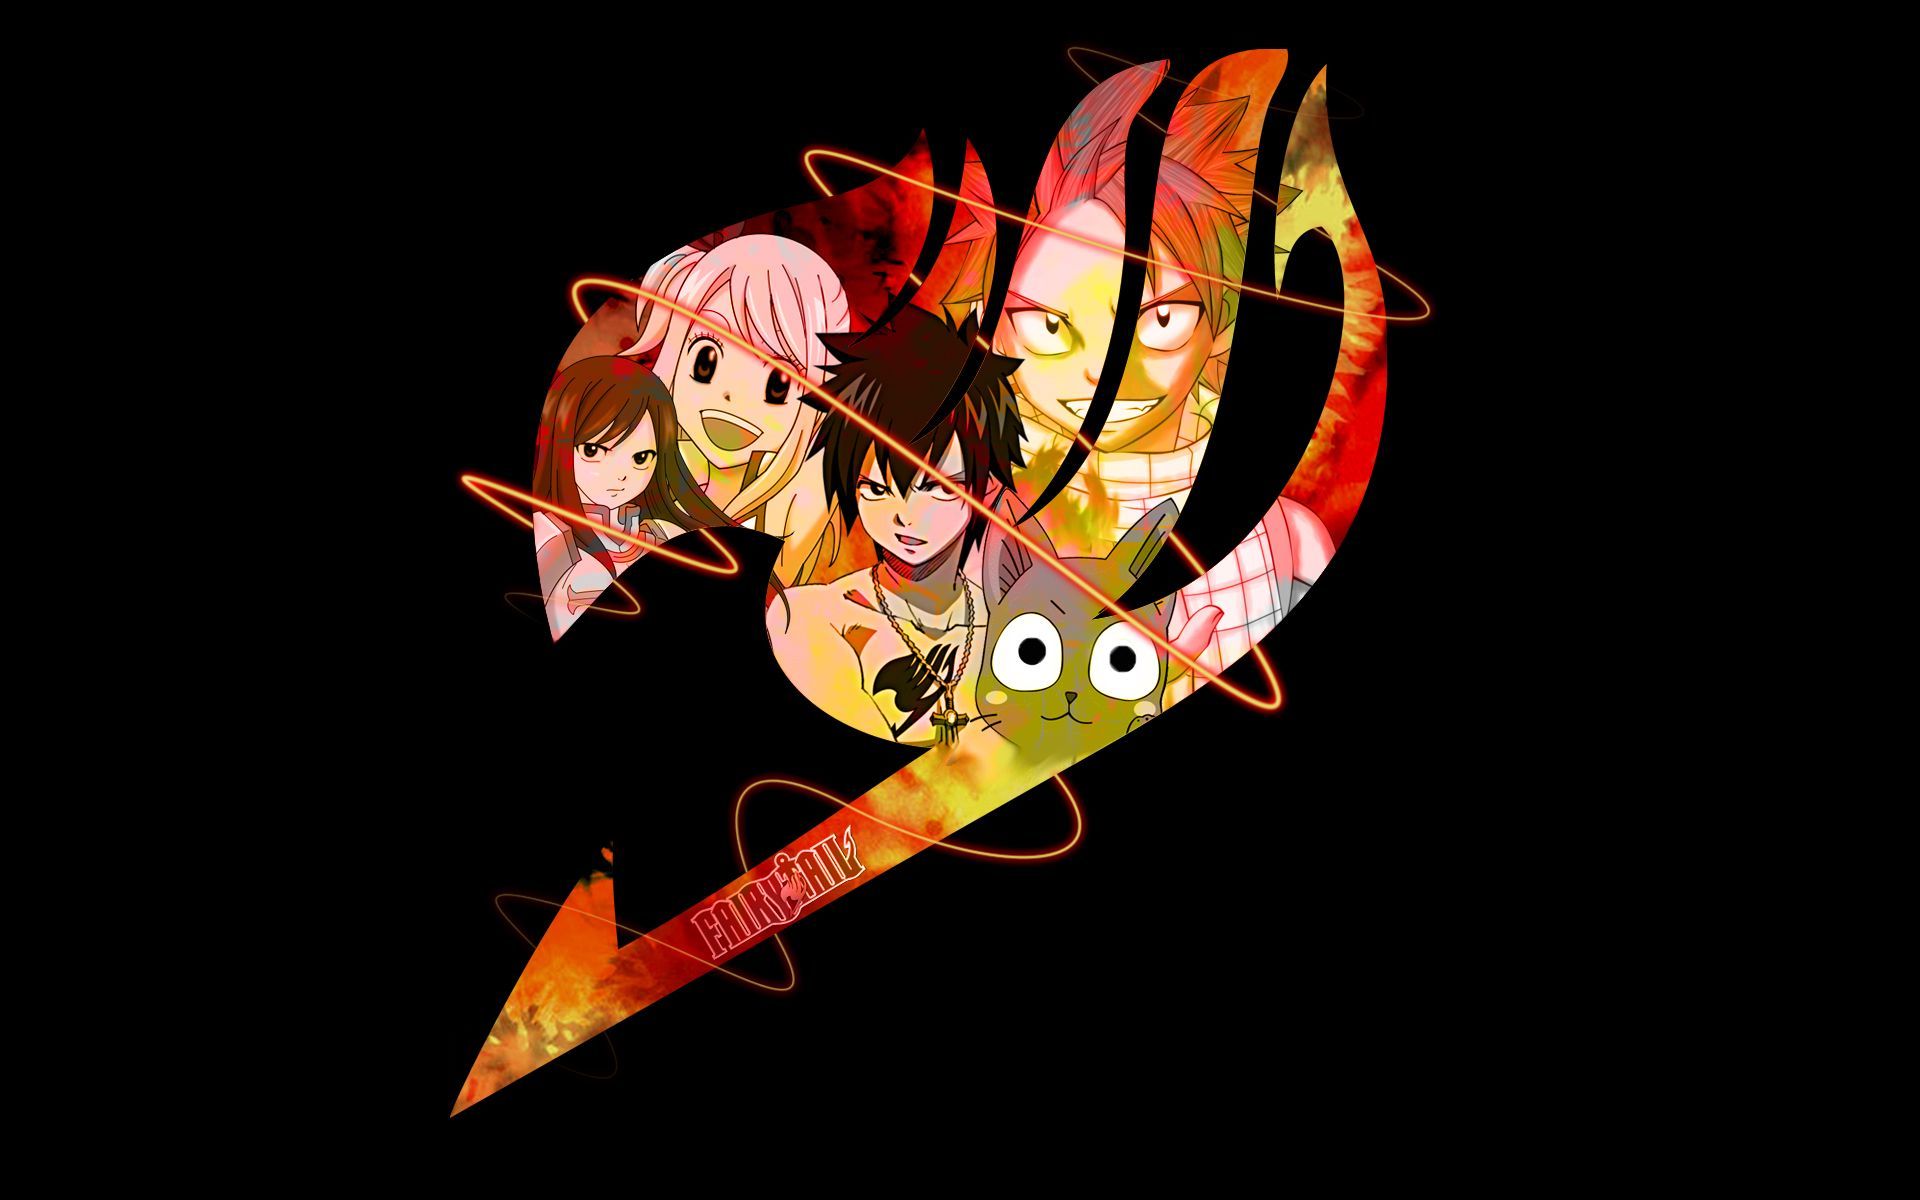 IMAGE fairy tail logo iphone wallpaper